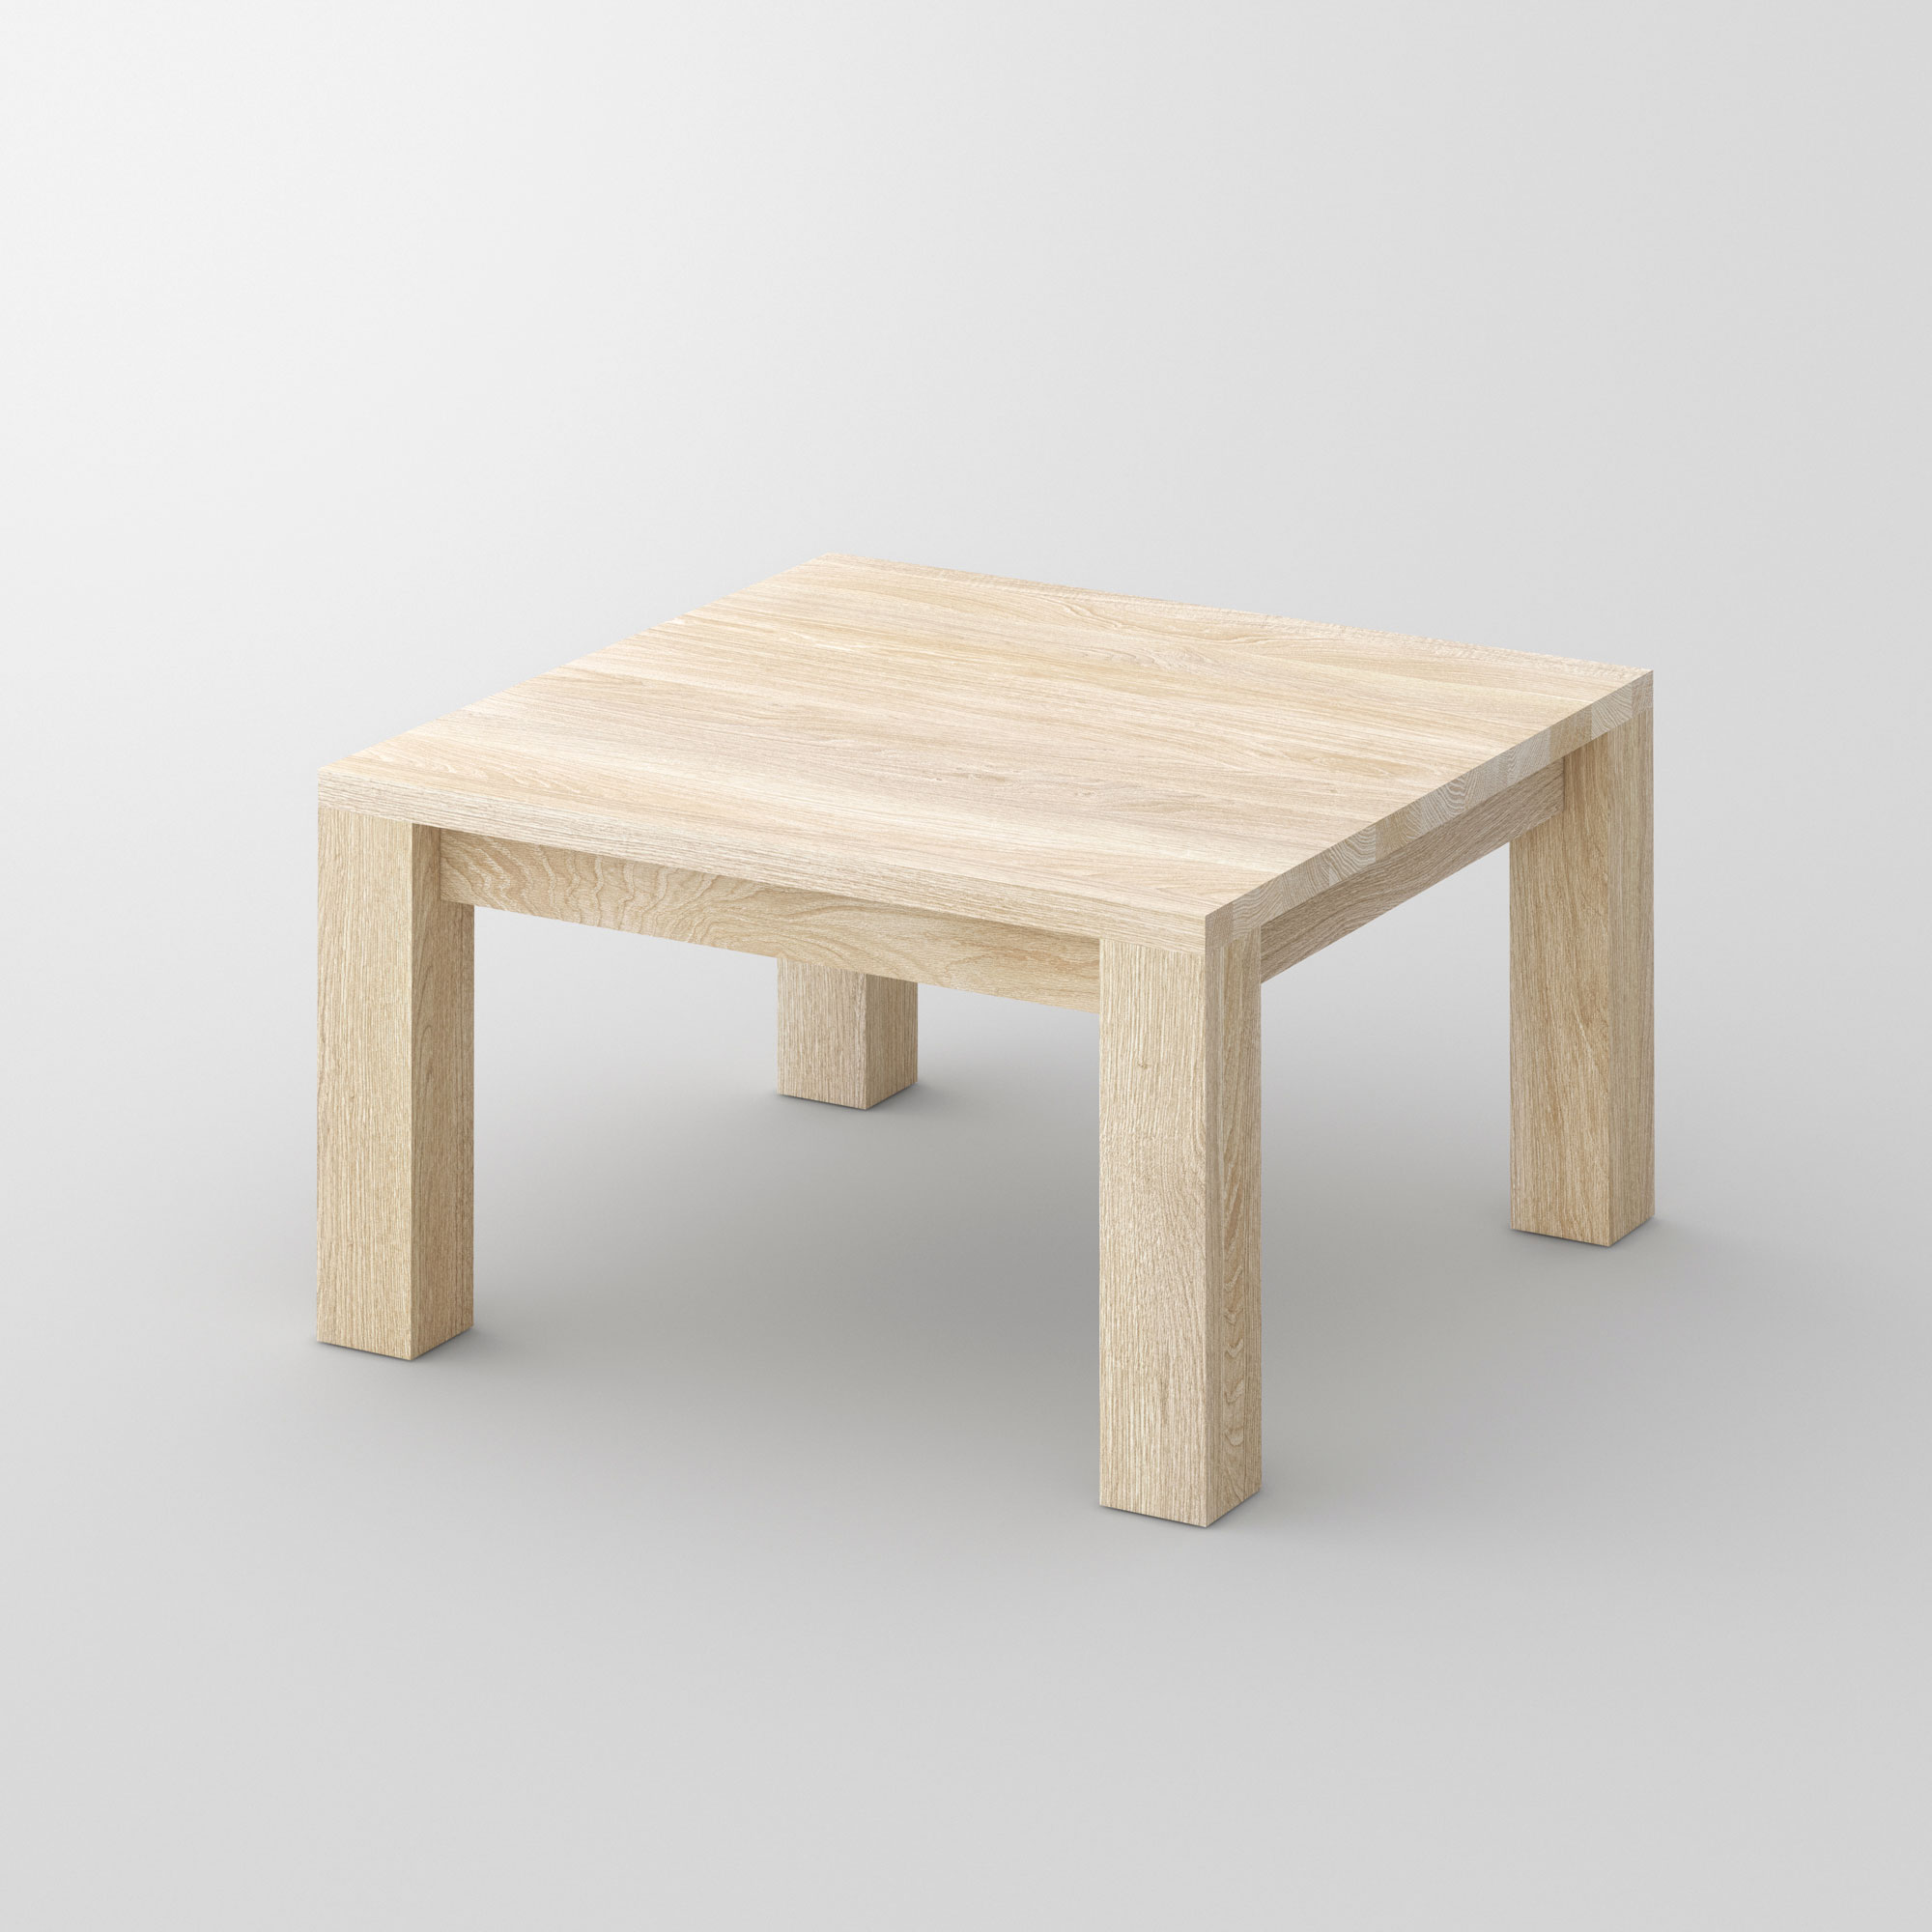 Coffee Table in Oak CUBUS cam1 custom made in solid wood by vitamin design